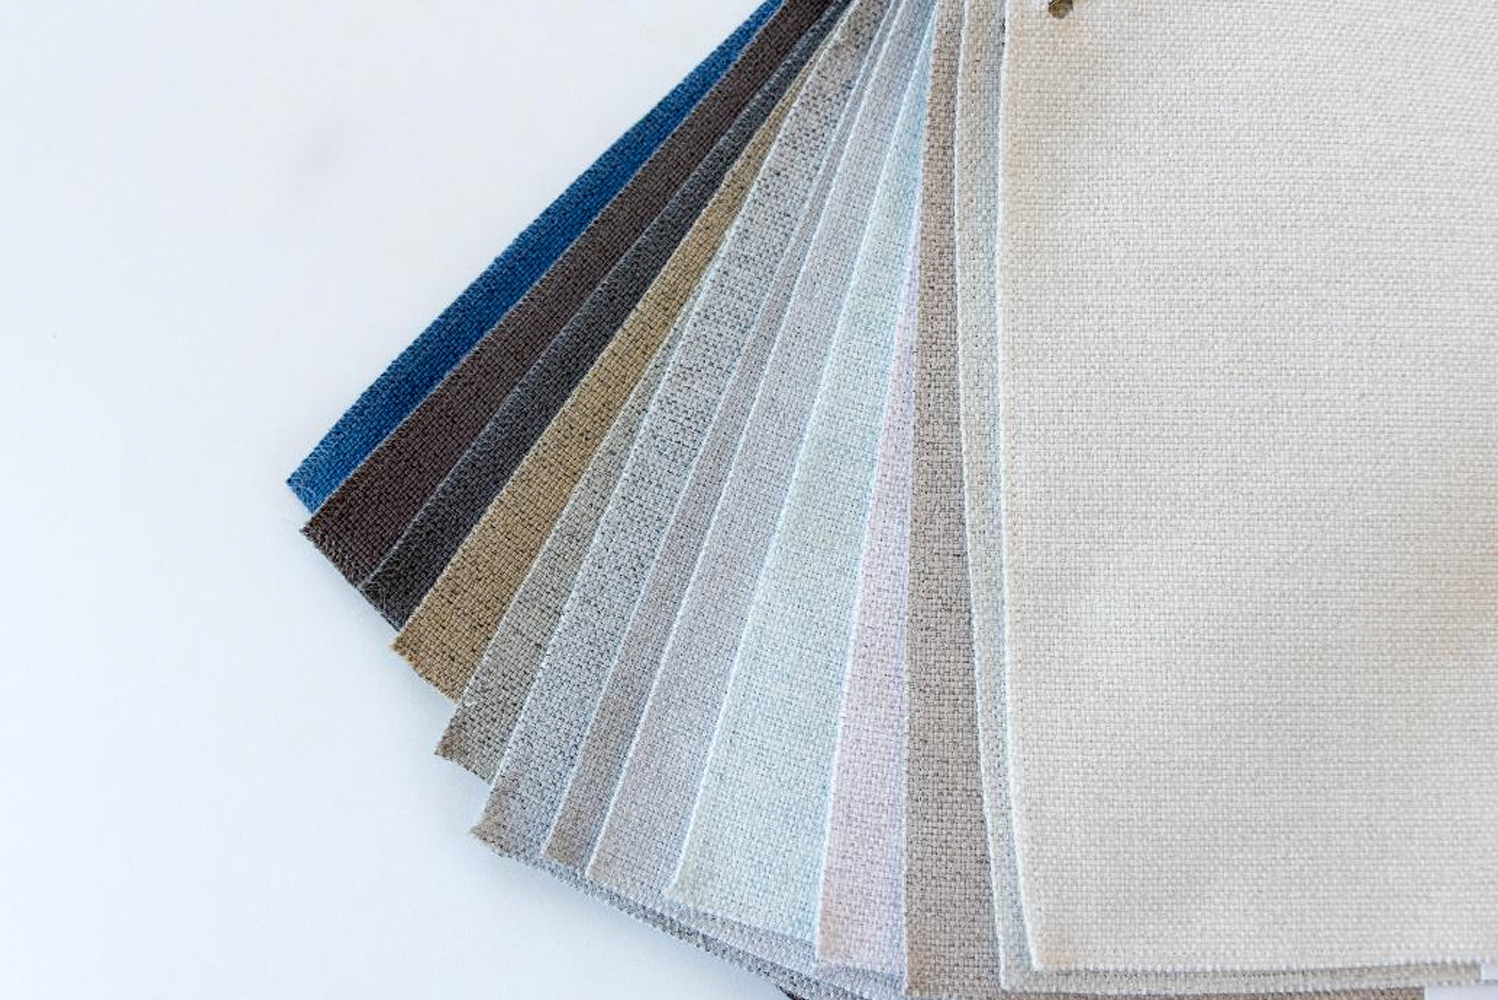 The Specialty Interiors business of Milliken  Company launched the new texture-driven Breathe by Milliken home fabrics incl